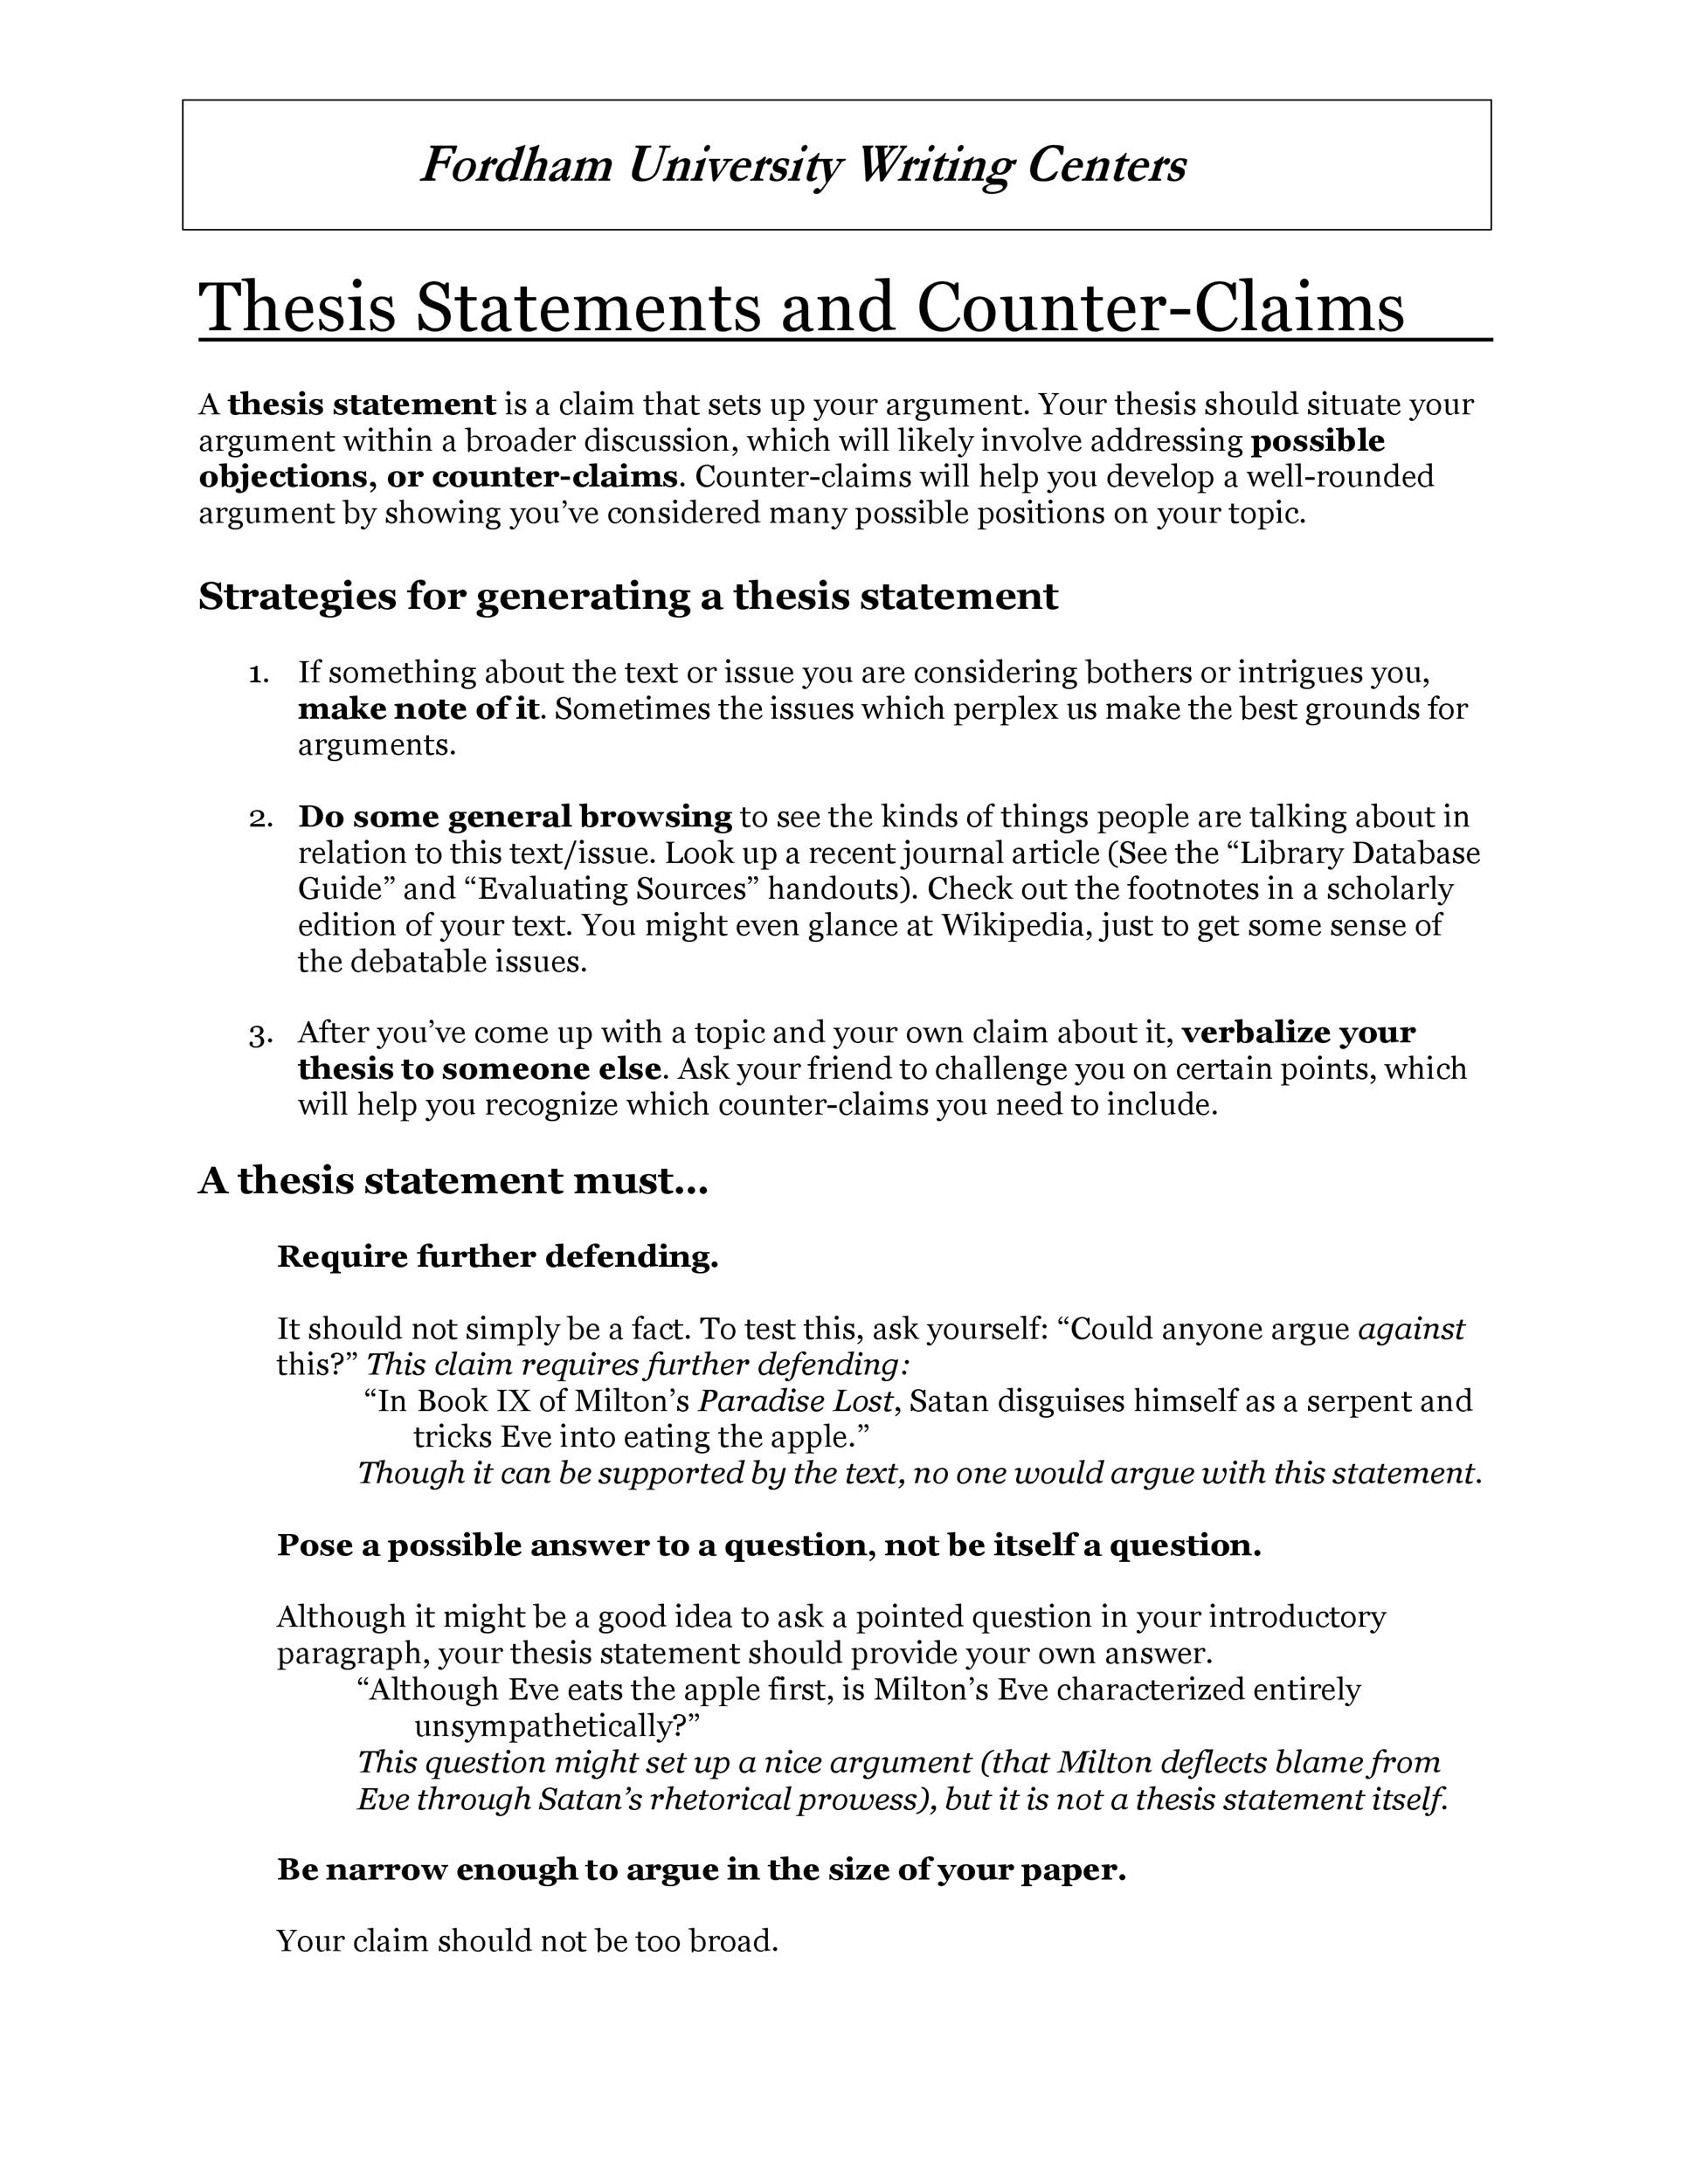 introduction thesis statement